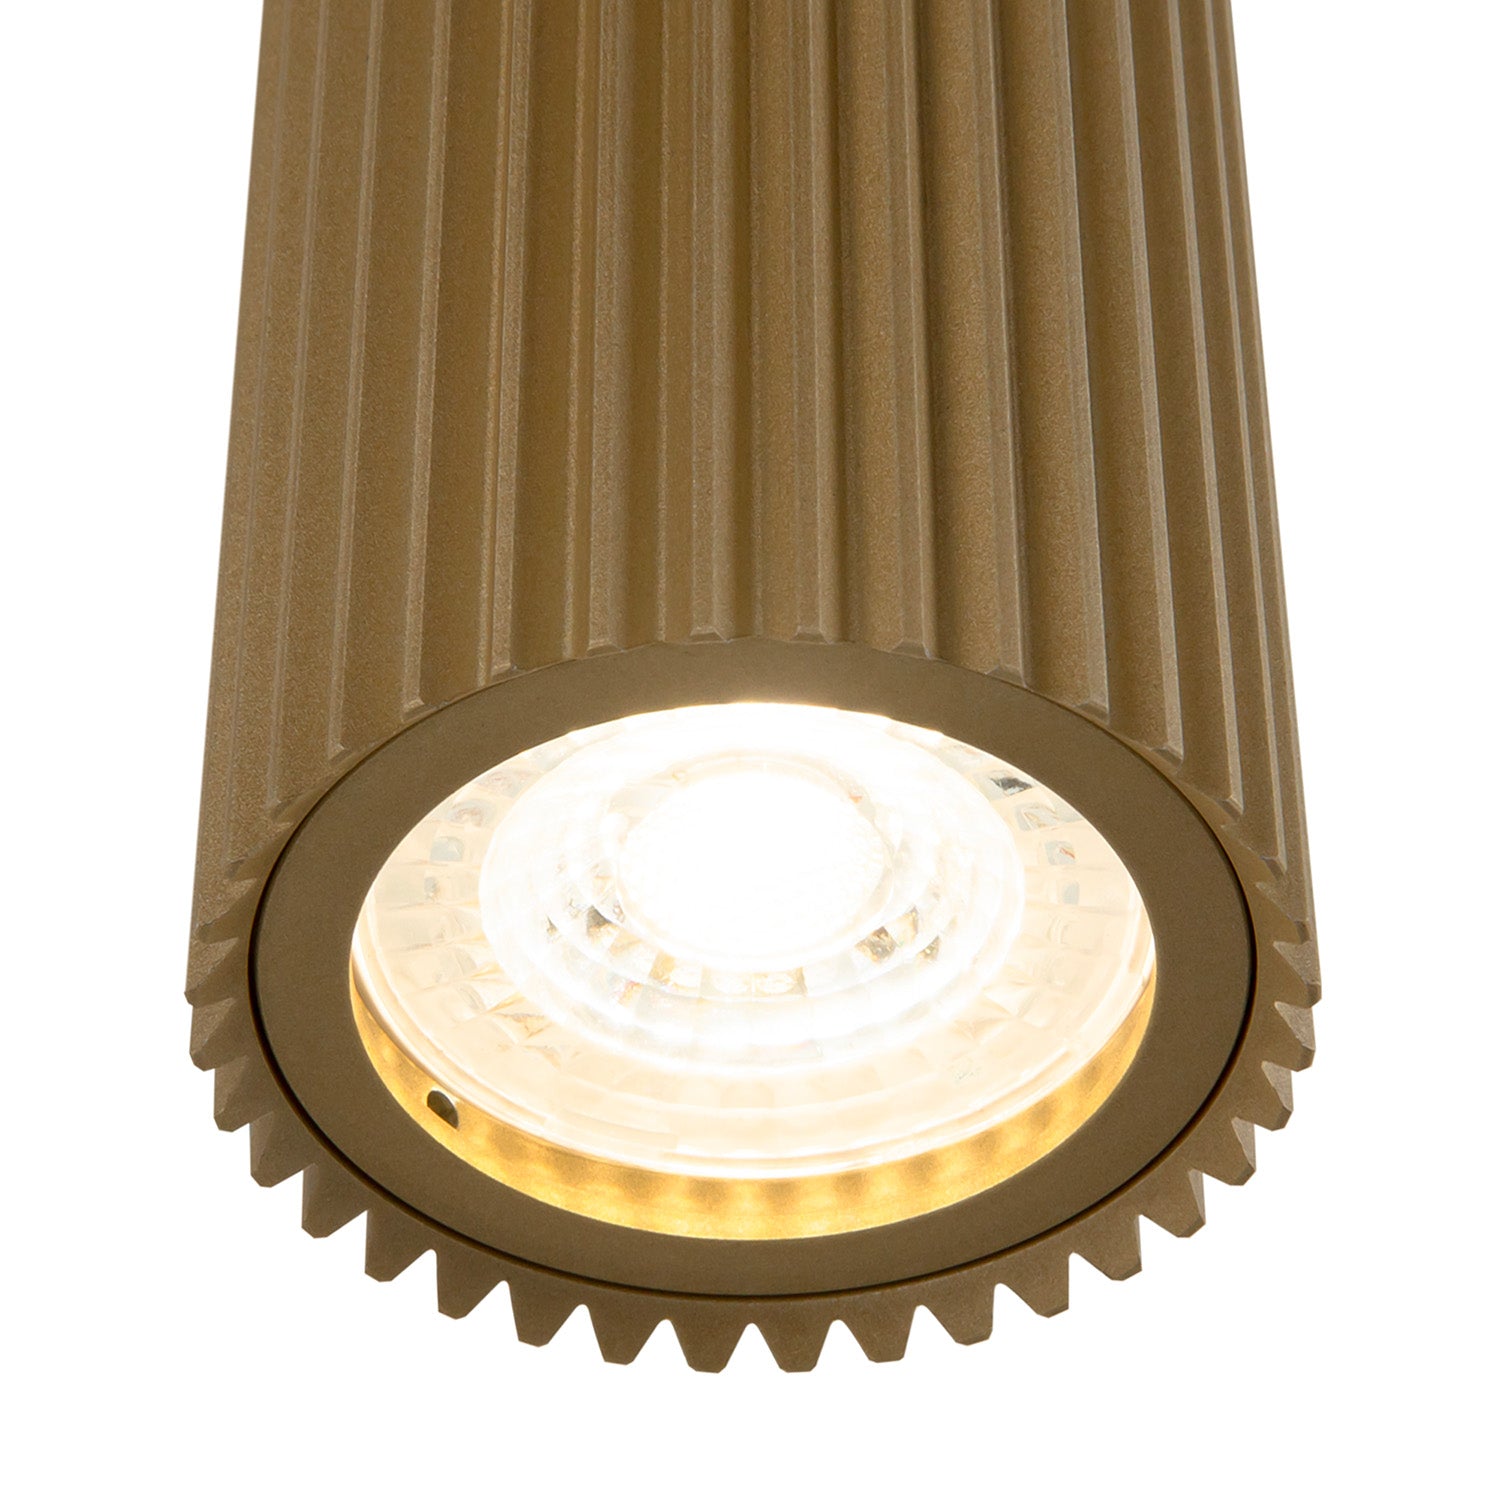 DYNAMICS - Modern wall light with striated design